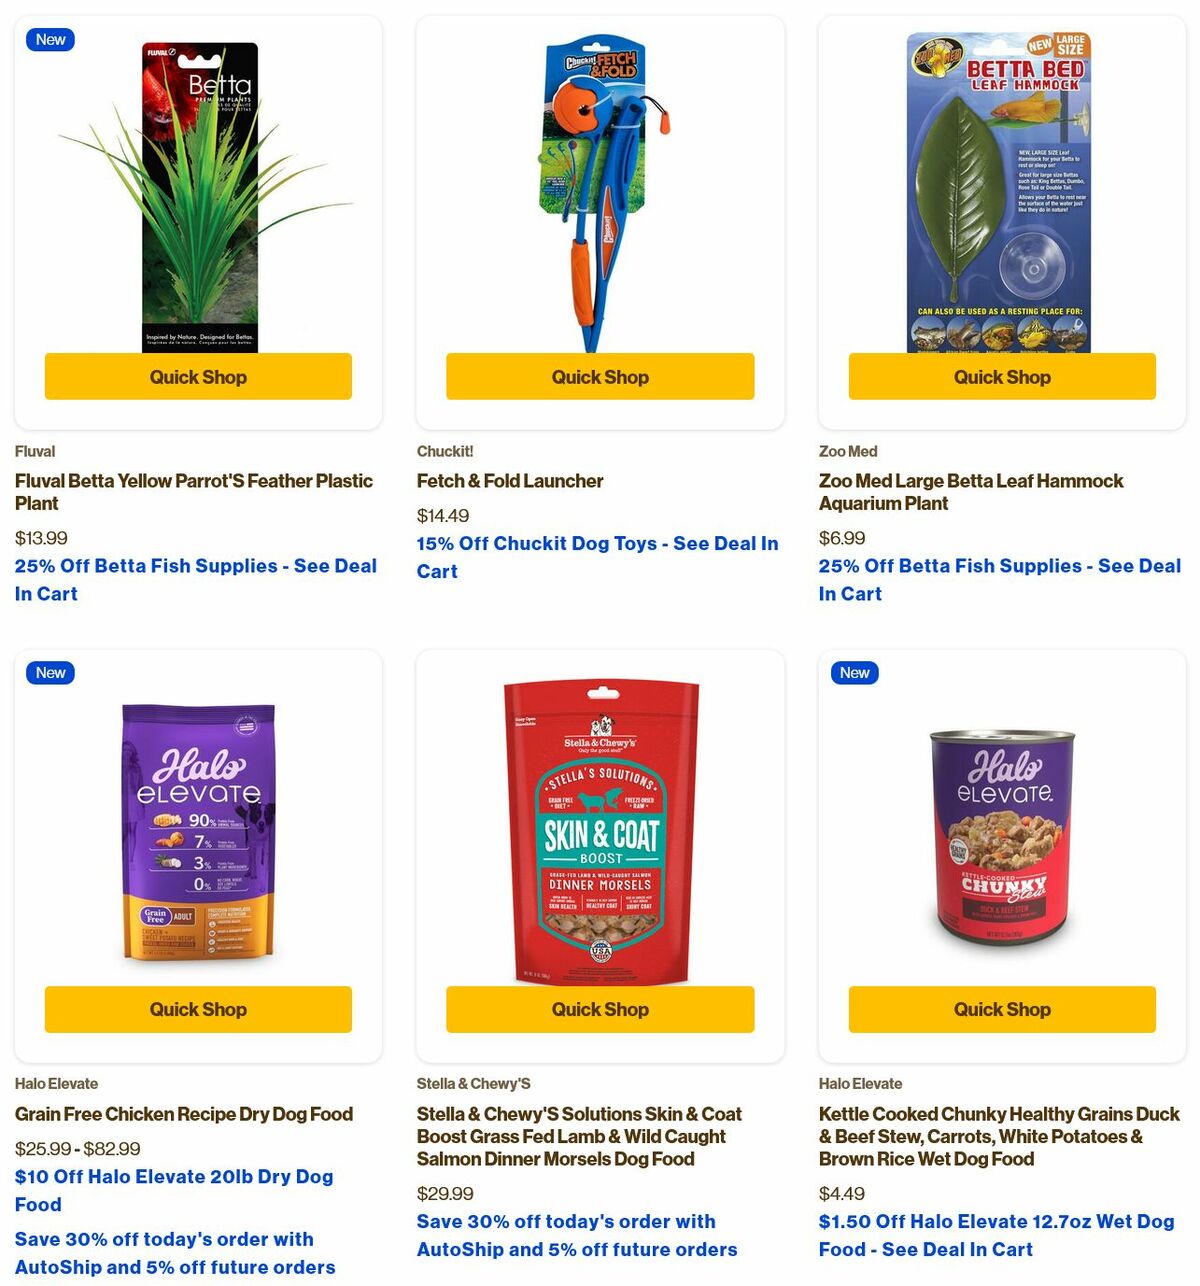 Pet Supermarket Weekly Ad from May 1